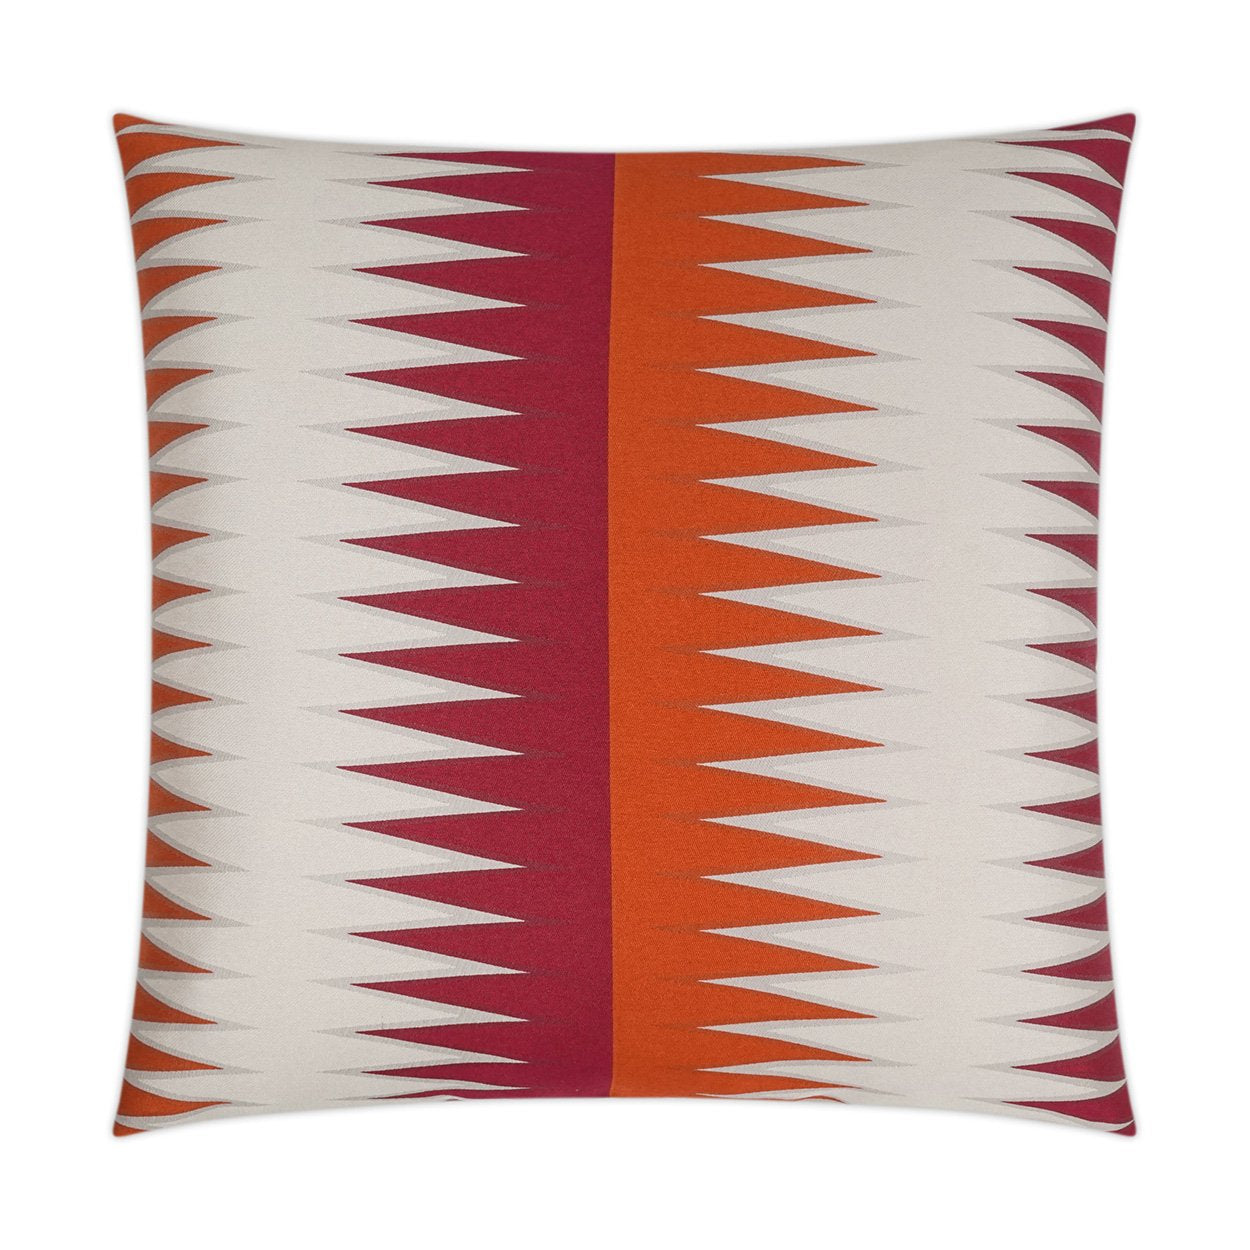 Luxury Lumbar Pillow - 24” x 14” - Vamanos Punch; Fuchsia, orange and white in a geometric pattern with pearl color borders